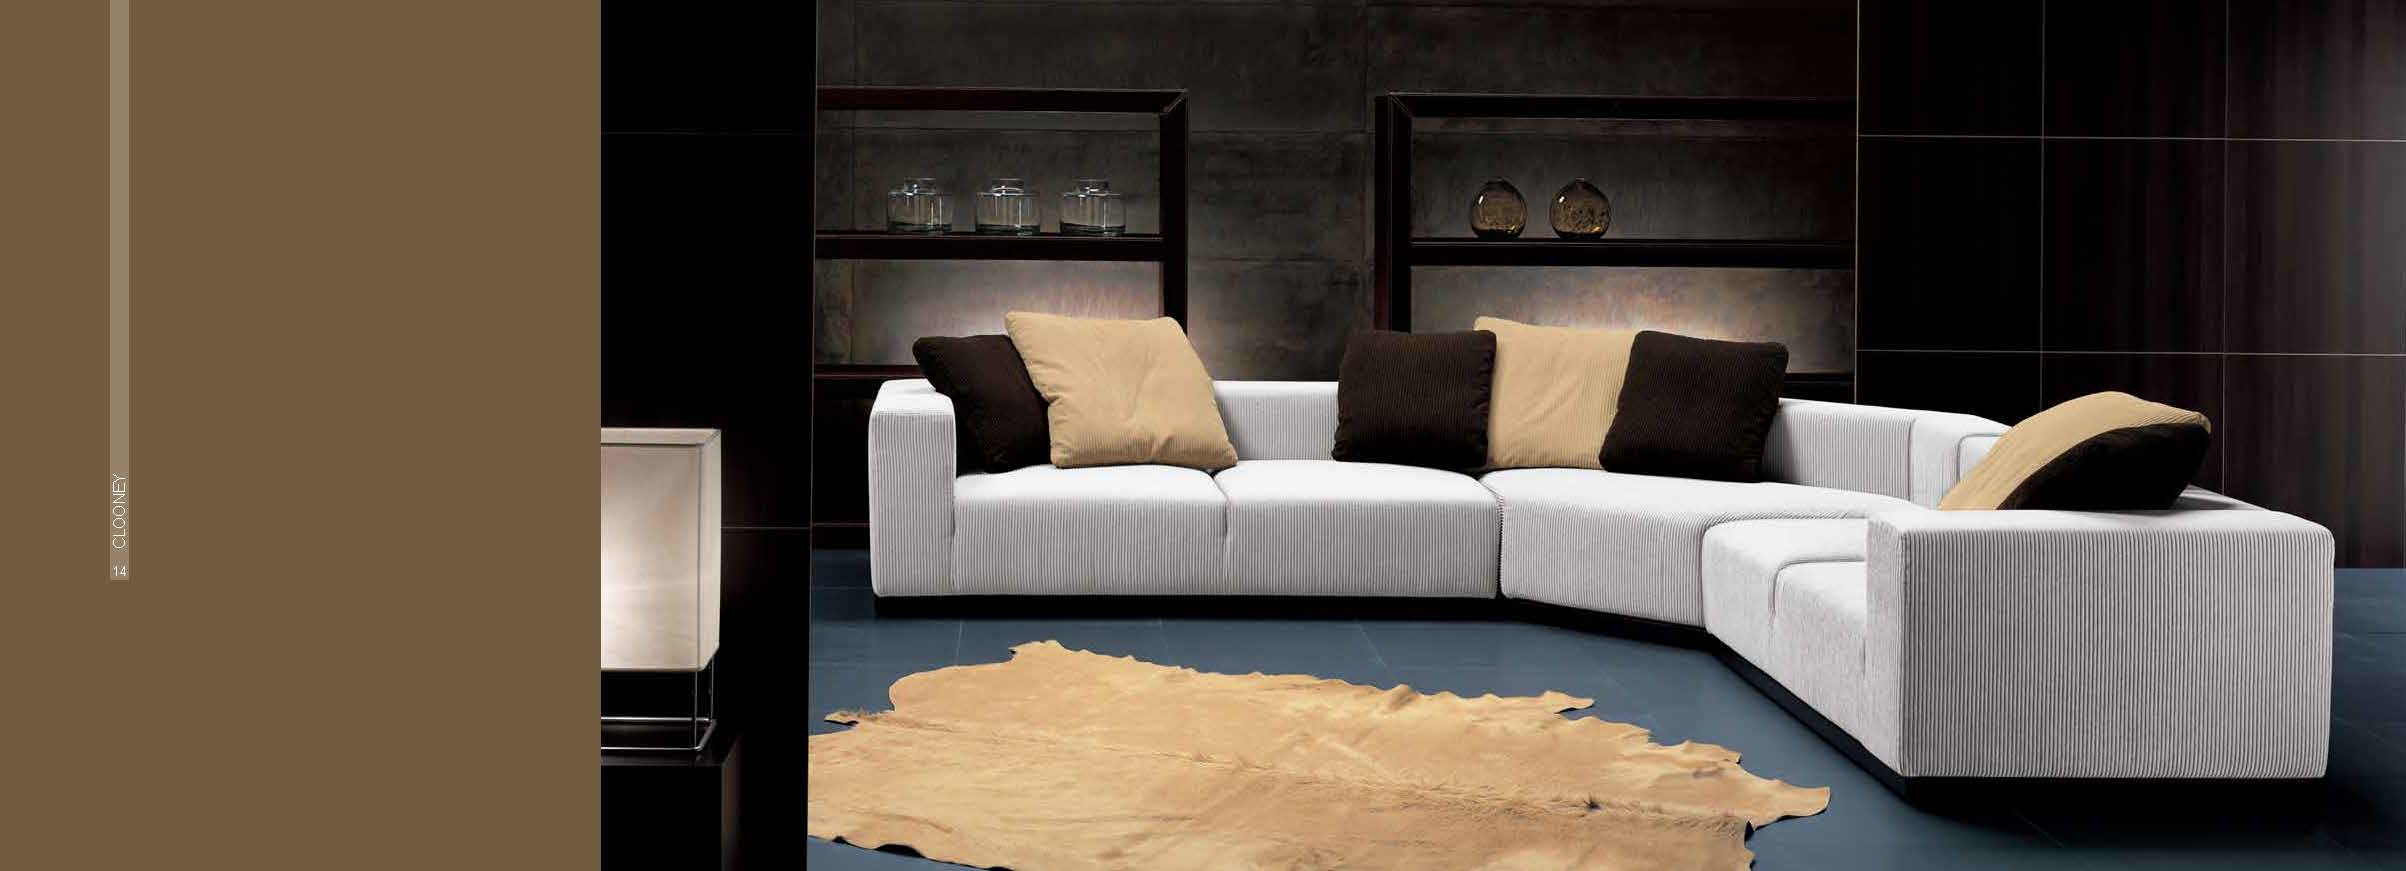 Brands Formerin Classic Living Room, Italy Clooney